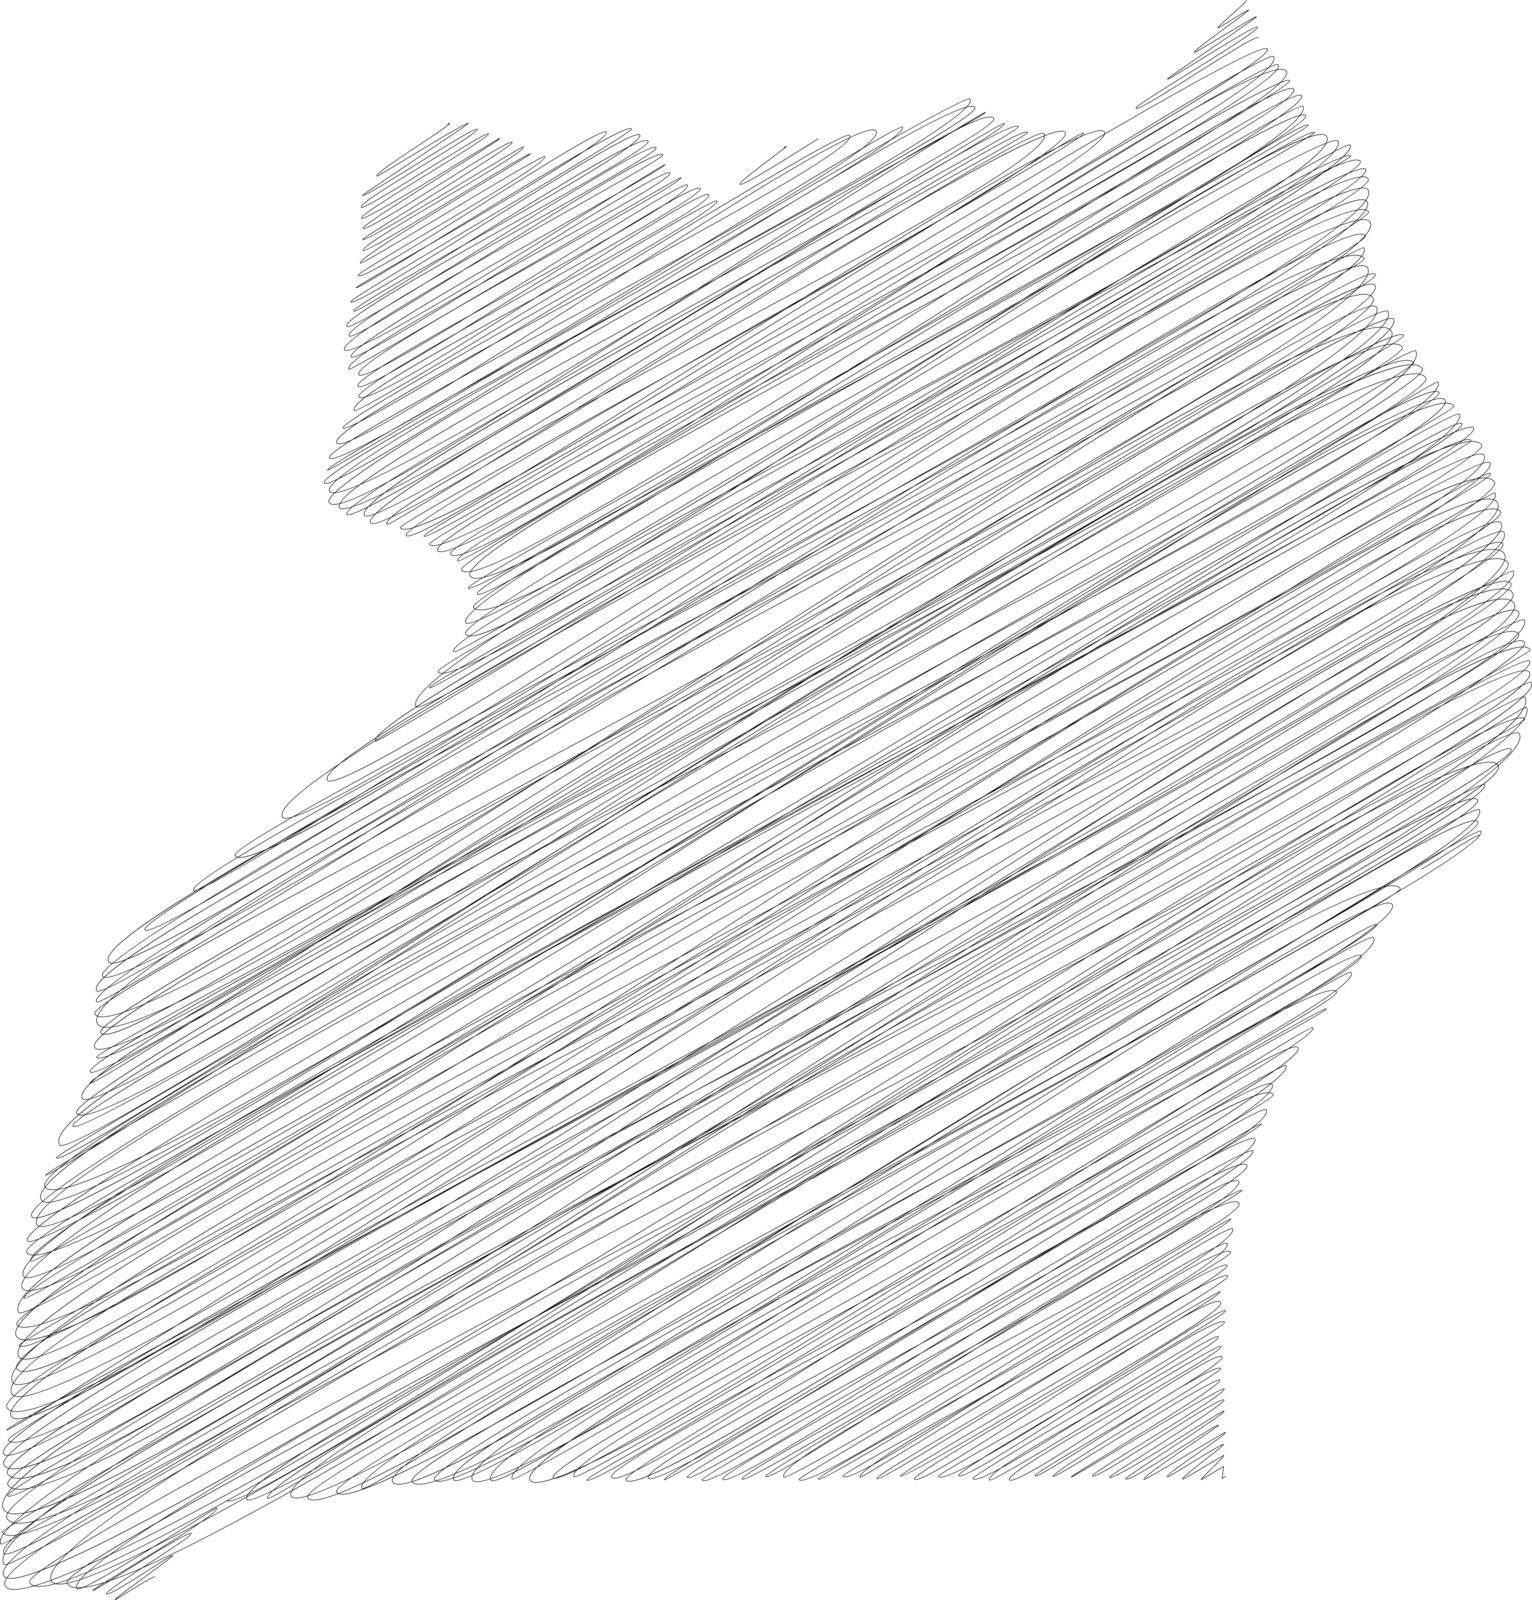 Uganda - pencil scribble sketch silhouette map of country area with dropped shadow. Simple flat vector illustration.